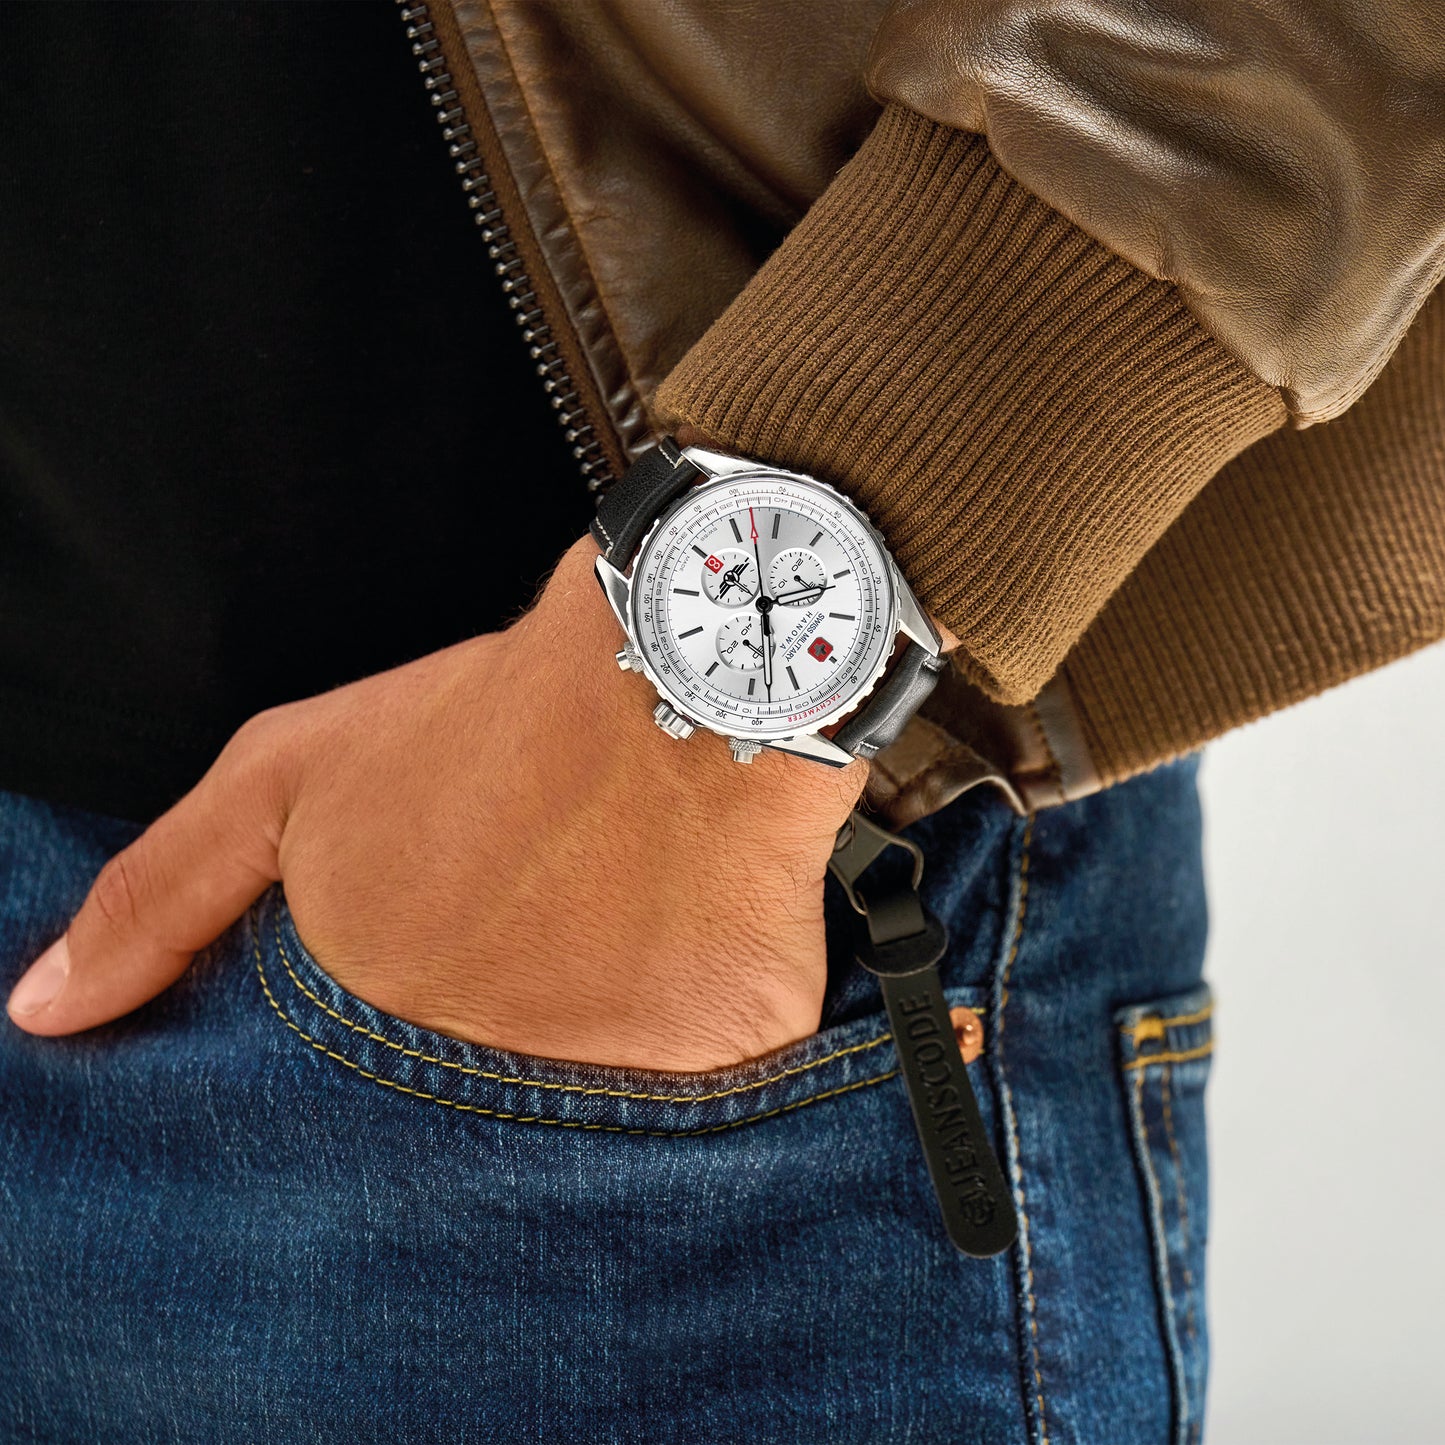 Swiss Military Hanowa Afterburn Chrono. Stainless steel case, silver dial and a genuine black Italian leather strap. 